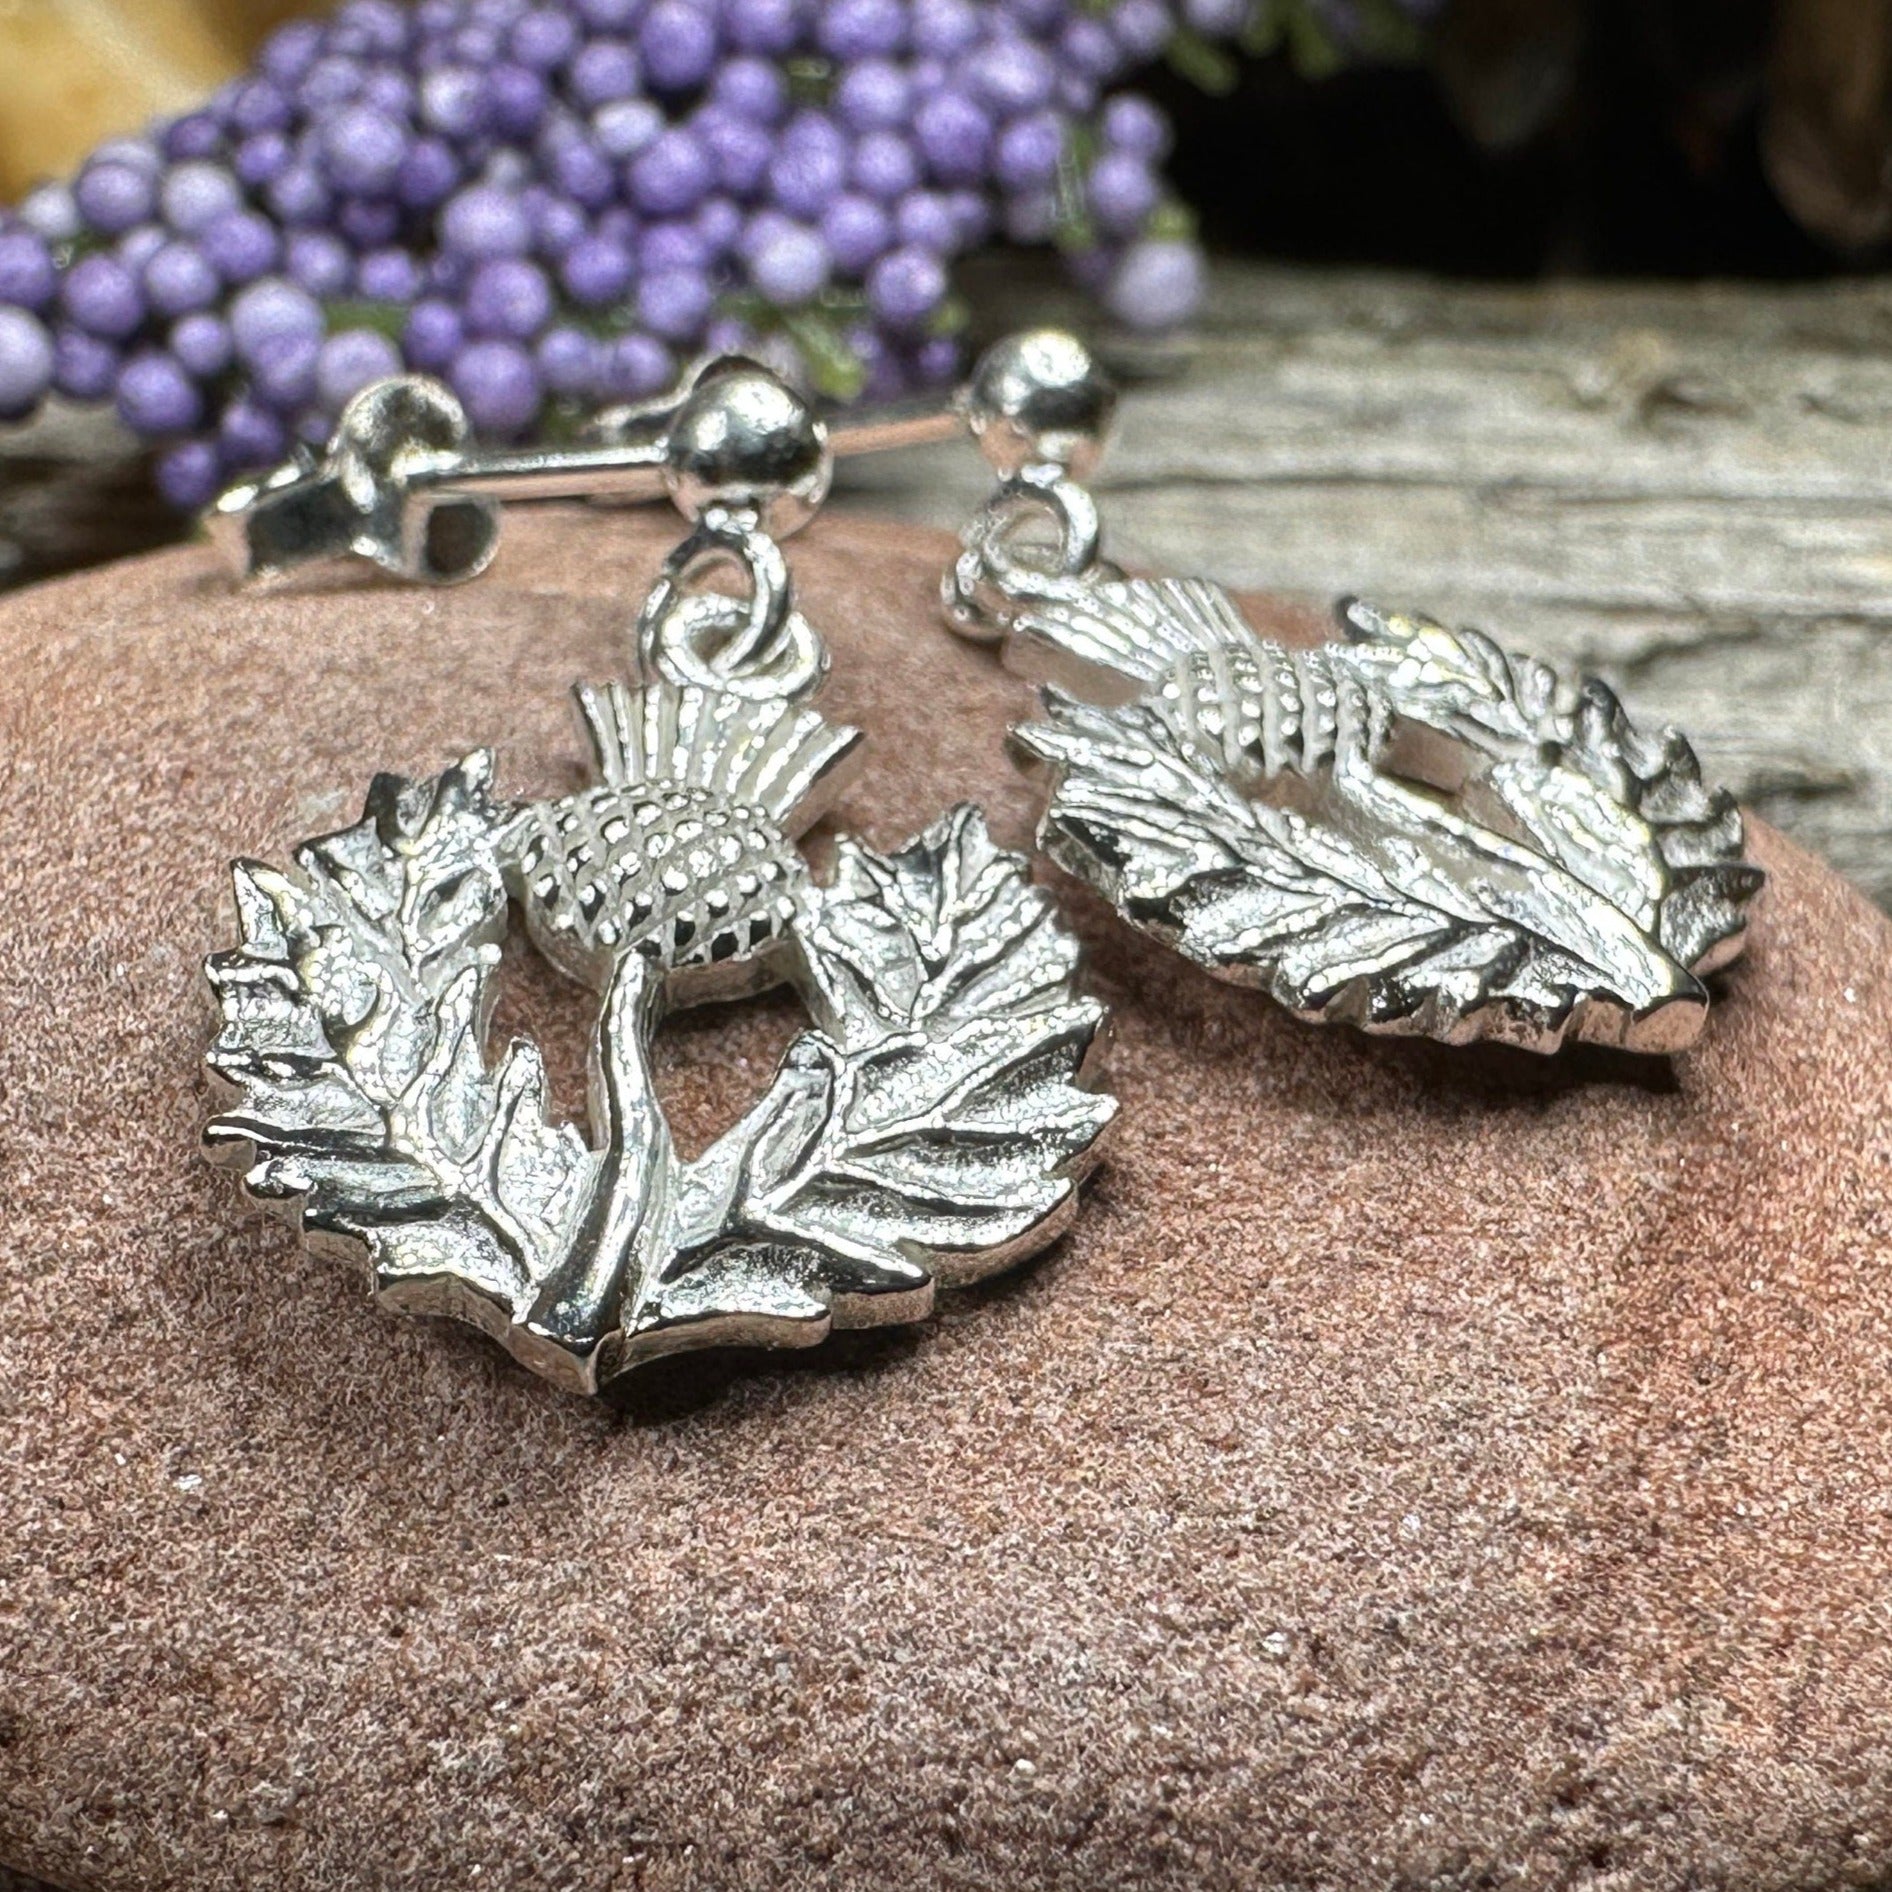 Realistic Thistle Earrings, Celtic Jewelry, Scotland Jewelry, Outlander Jewelry, Nature Jewelry, Thistle Jewelry, Post Earrings, Wife Gift